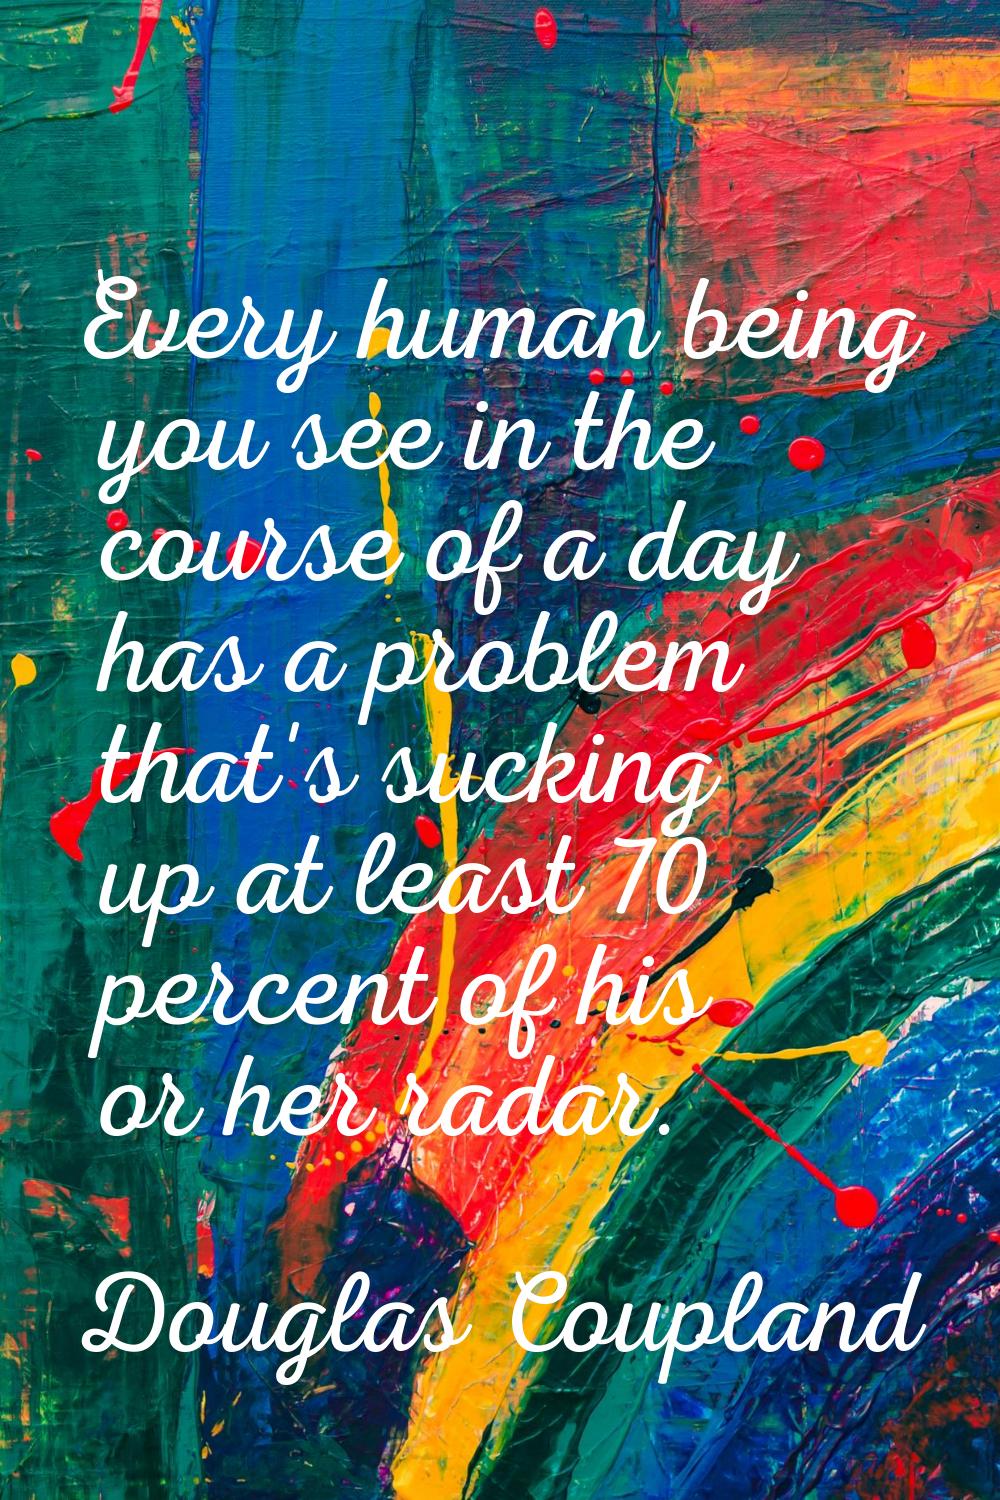 Every human being you see in the course of a day has a problem that's sucking up at least 70 percen